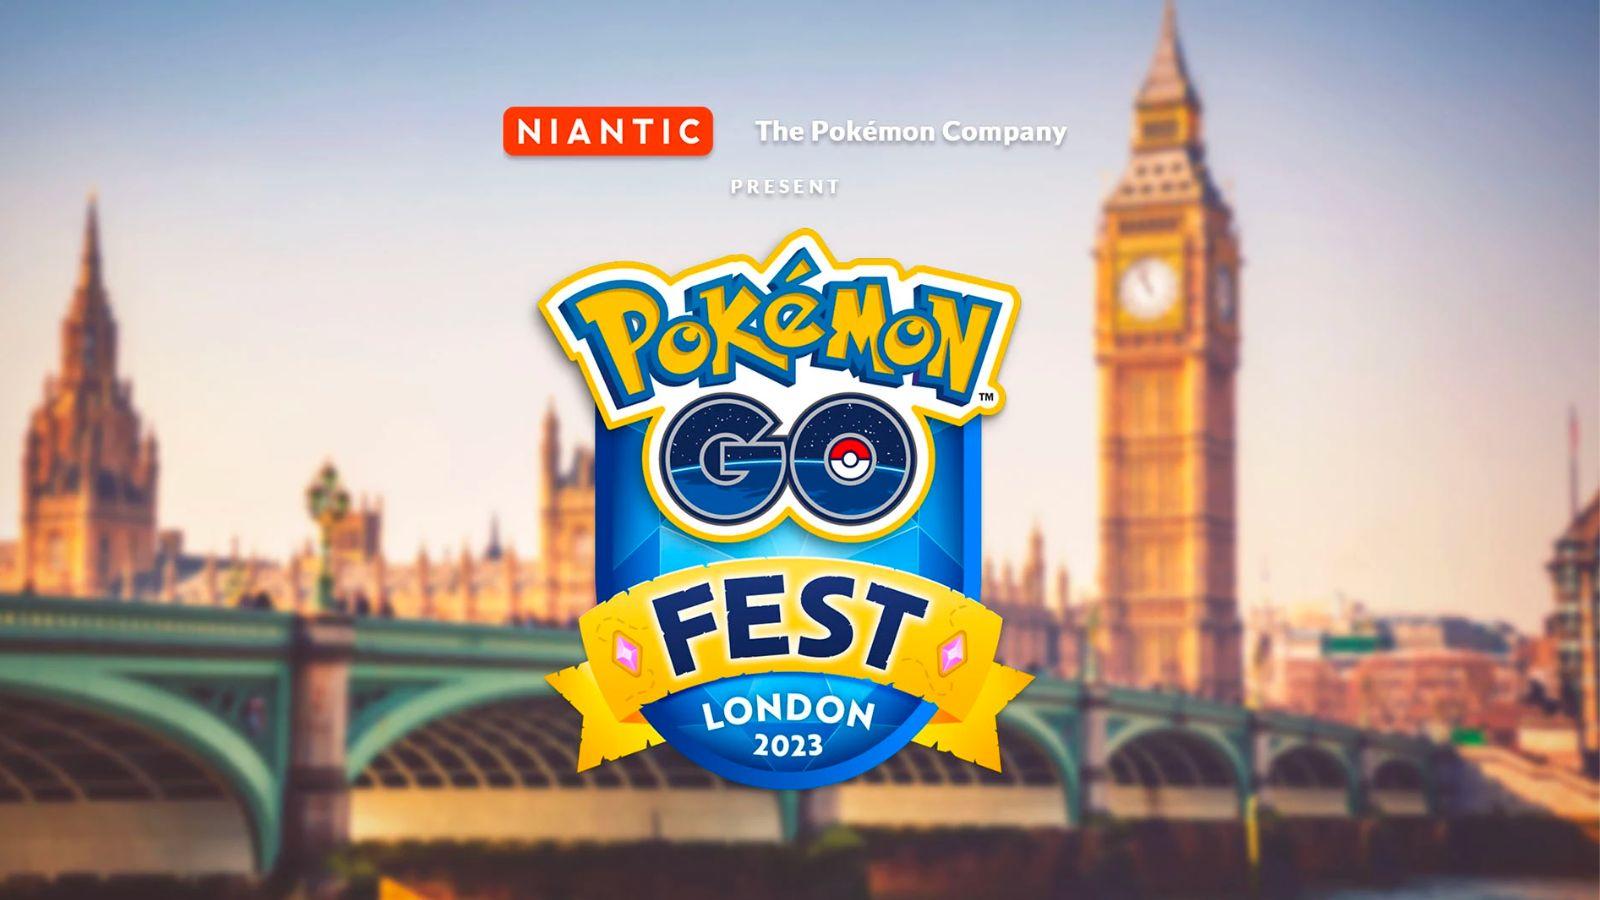 How to purchase tickets to Pokemon Go Fest 2023 London